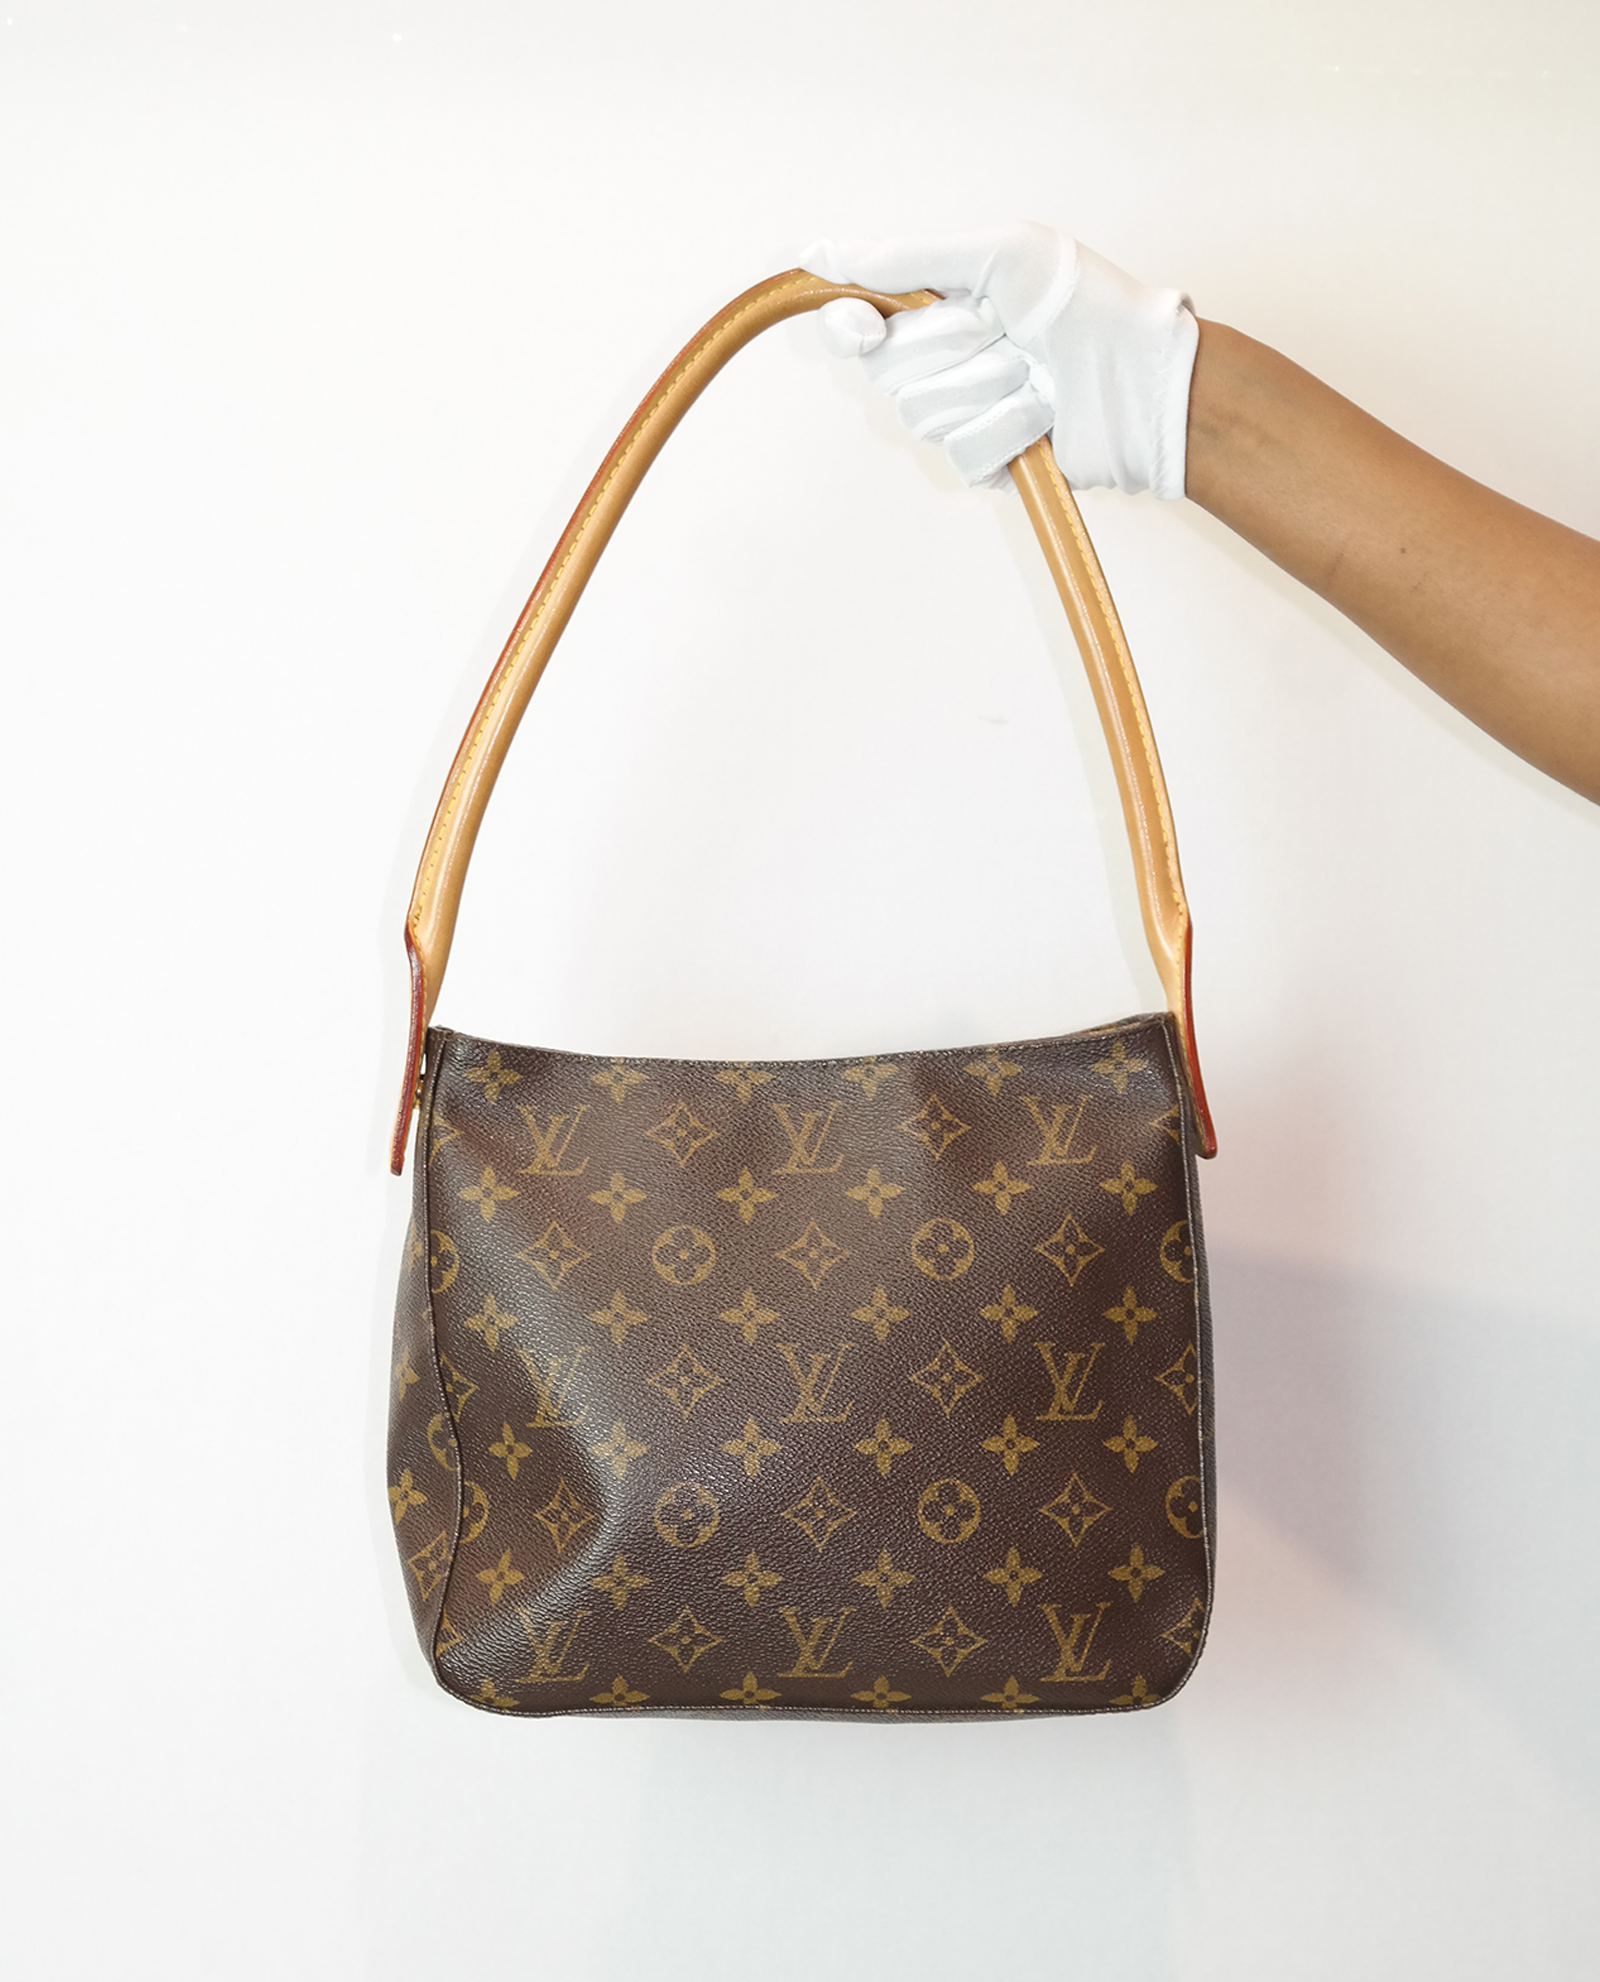 LV Looping Bag swap for it today at www.swapcouture.net!